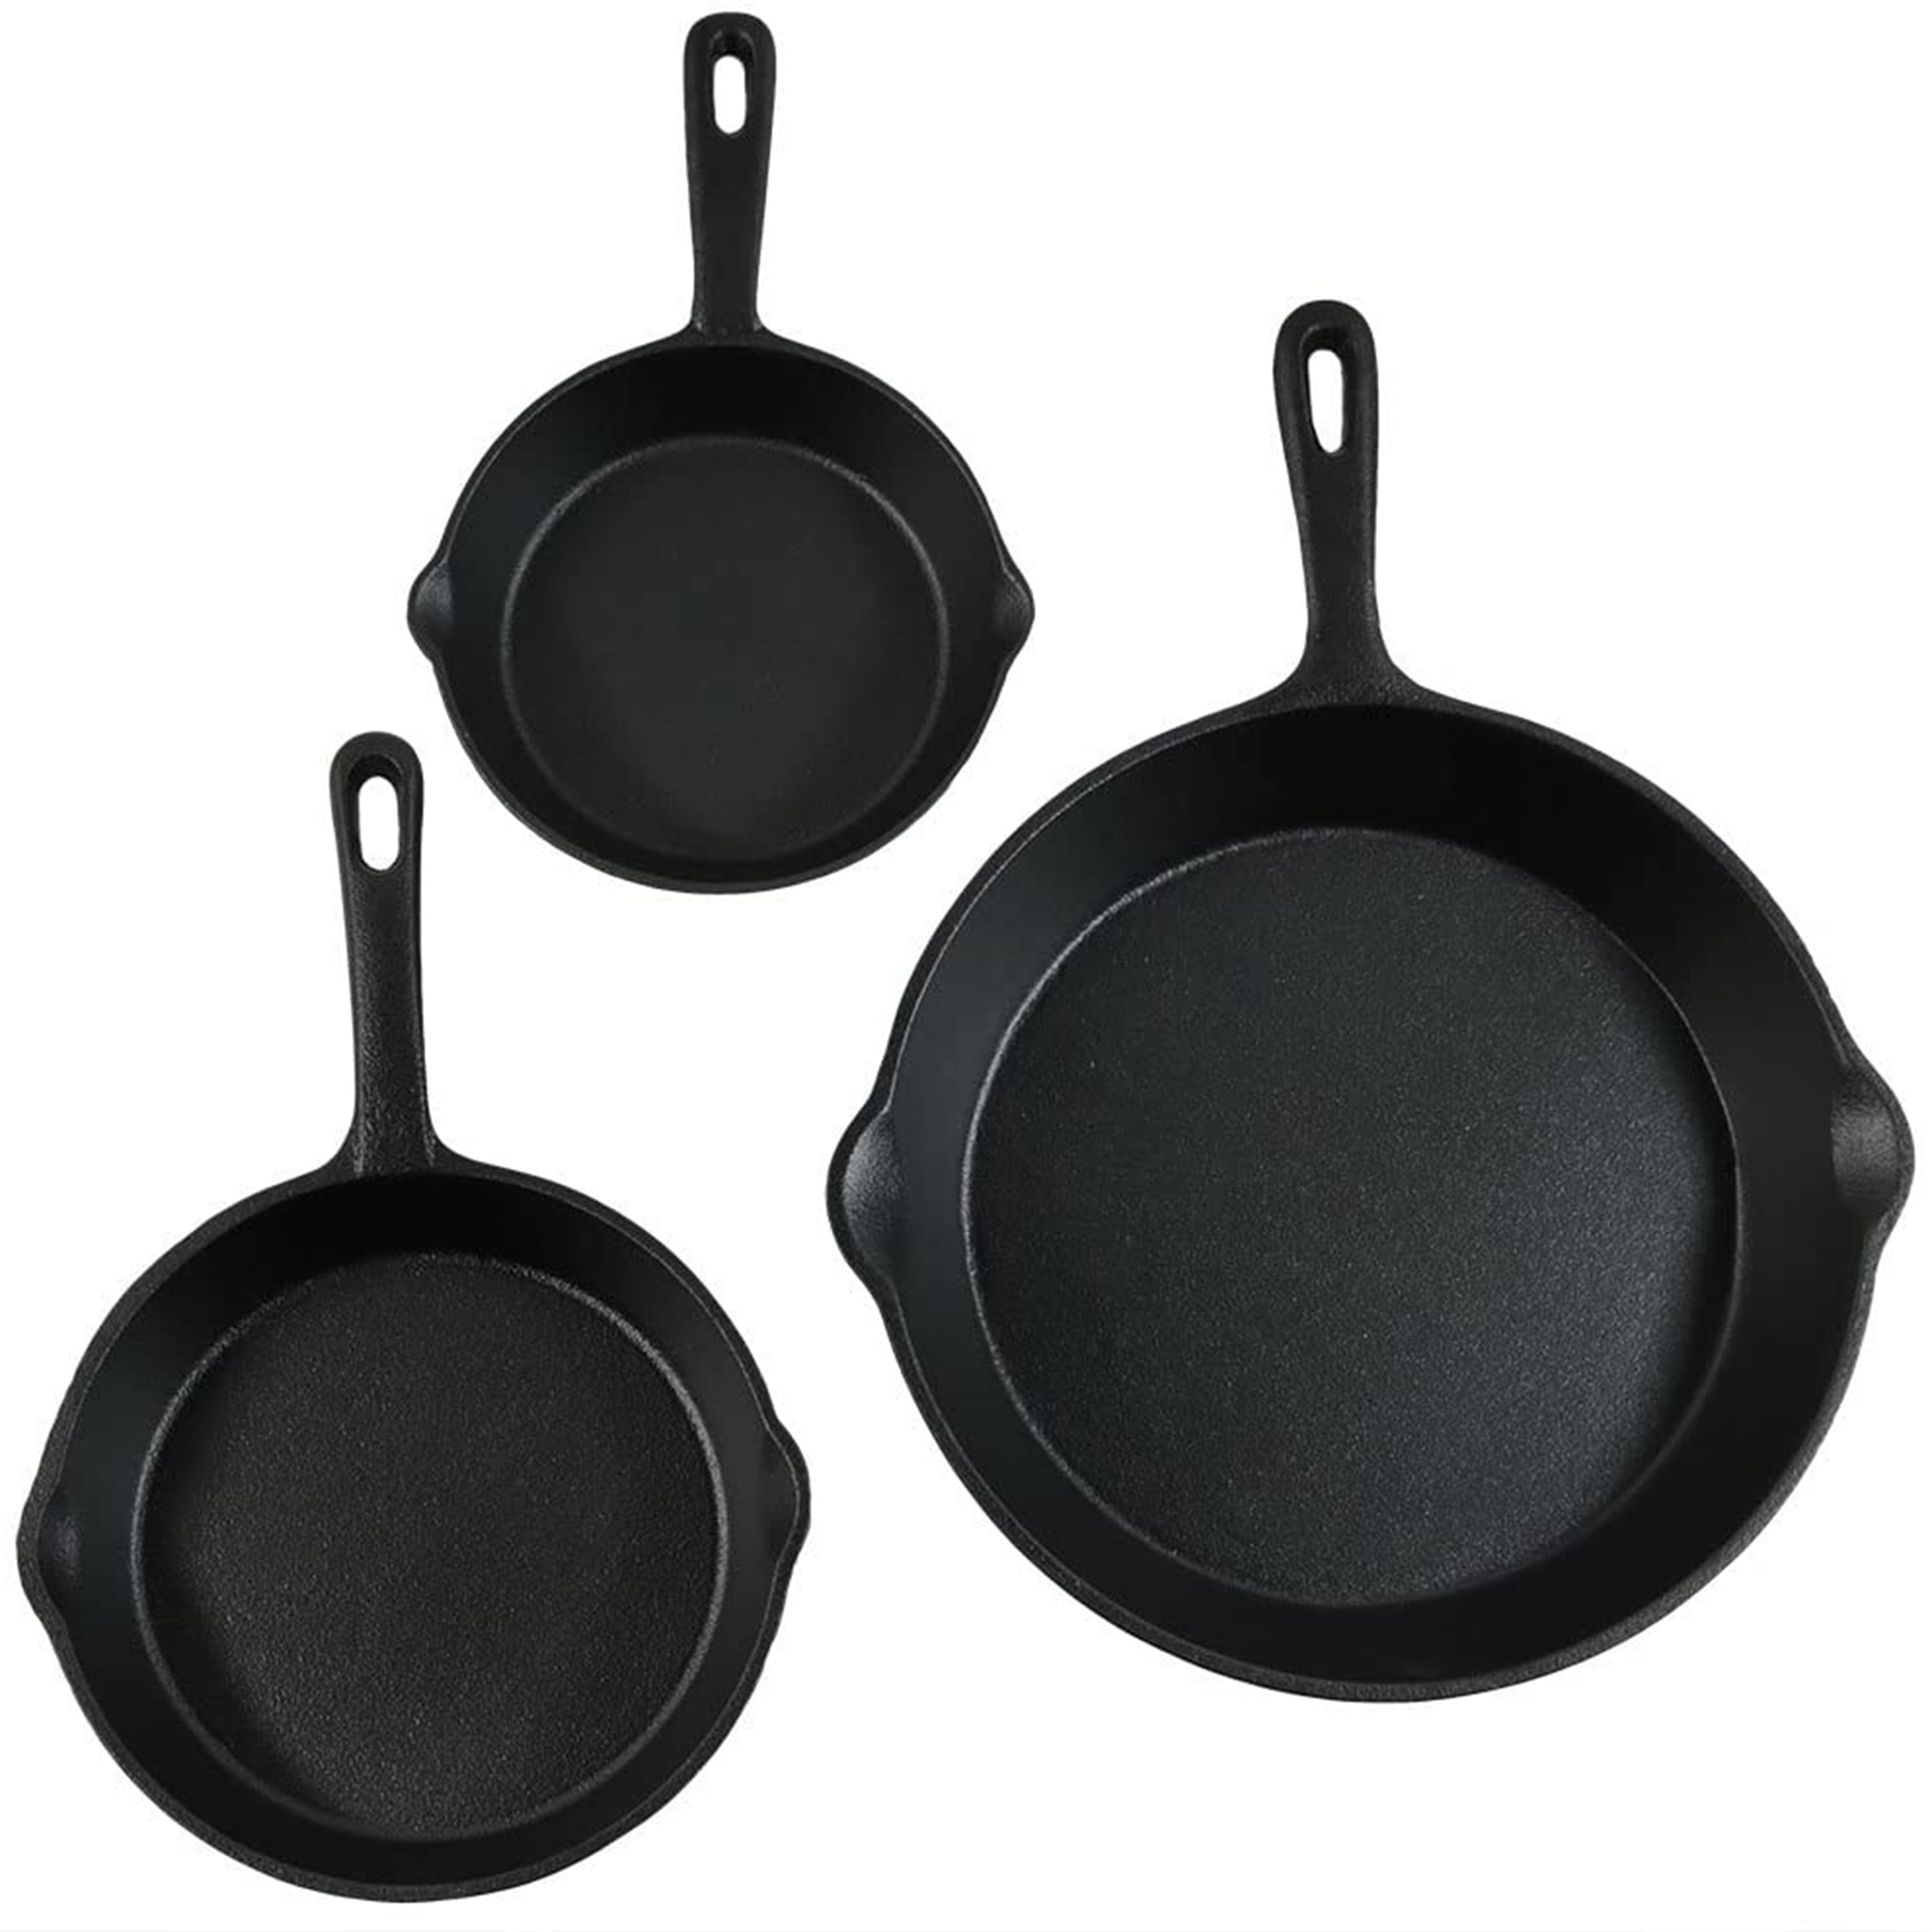 Pan Buddy: Lift and Carry Heavy Pots, Pans, and Cast Iron Skillets